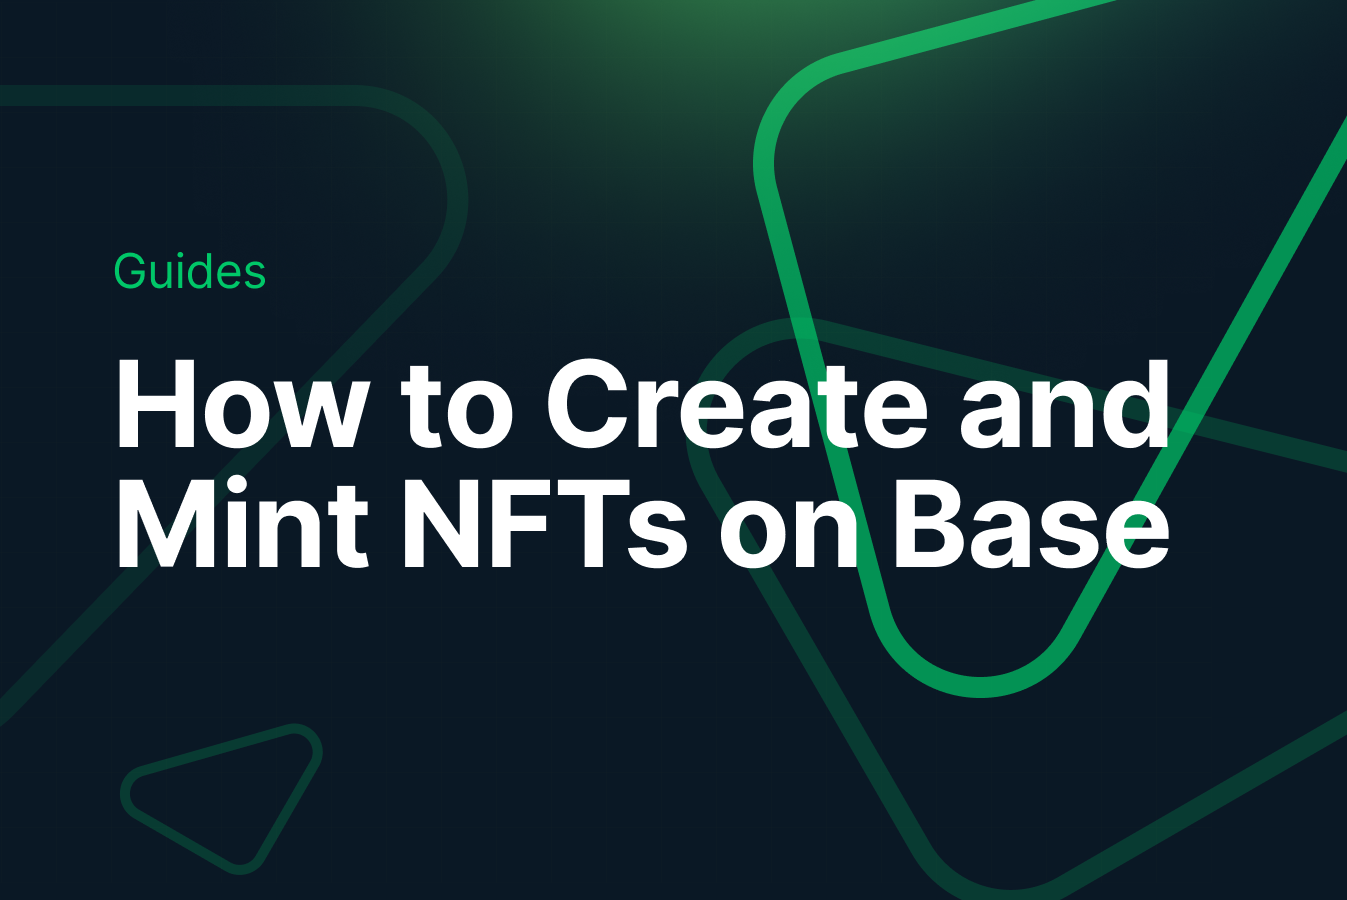 How to Create and Mint NFTs on Base